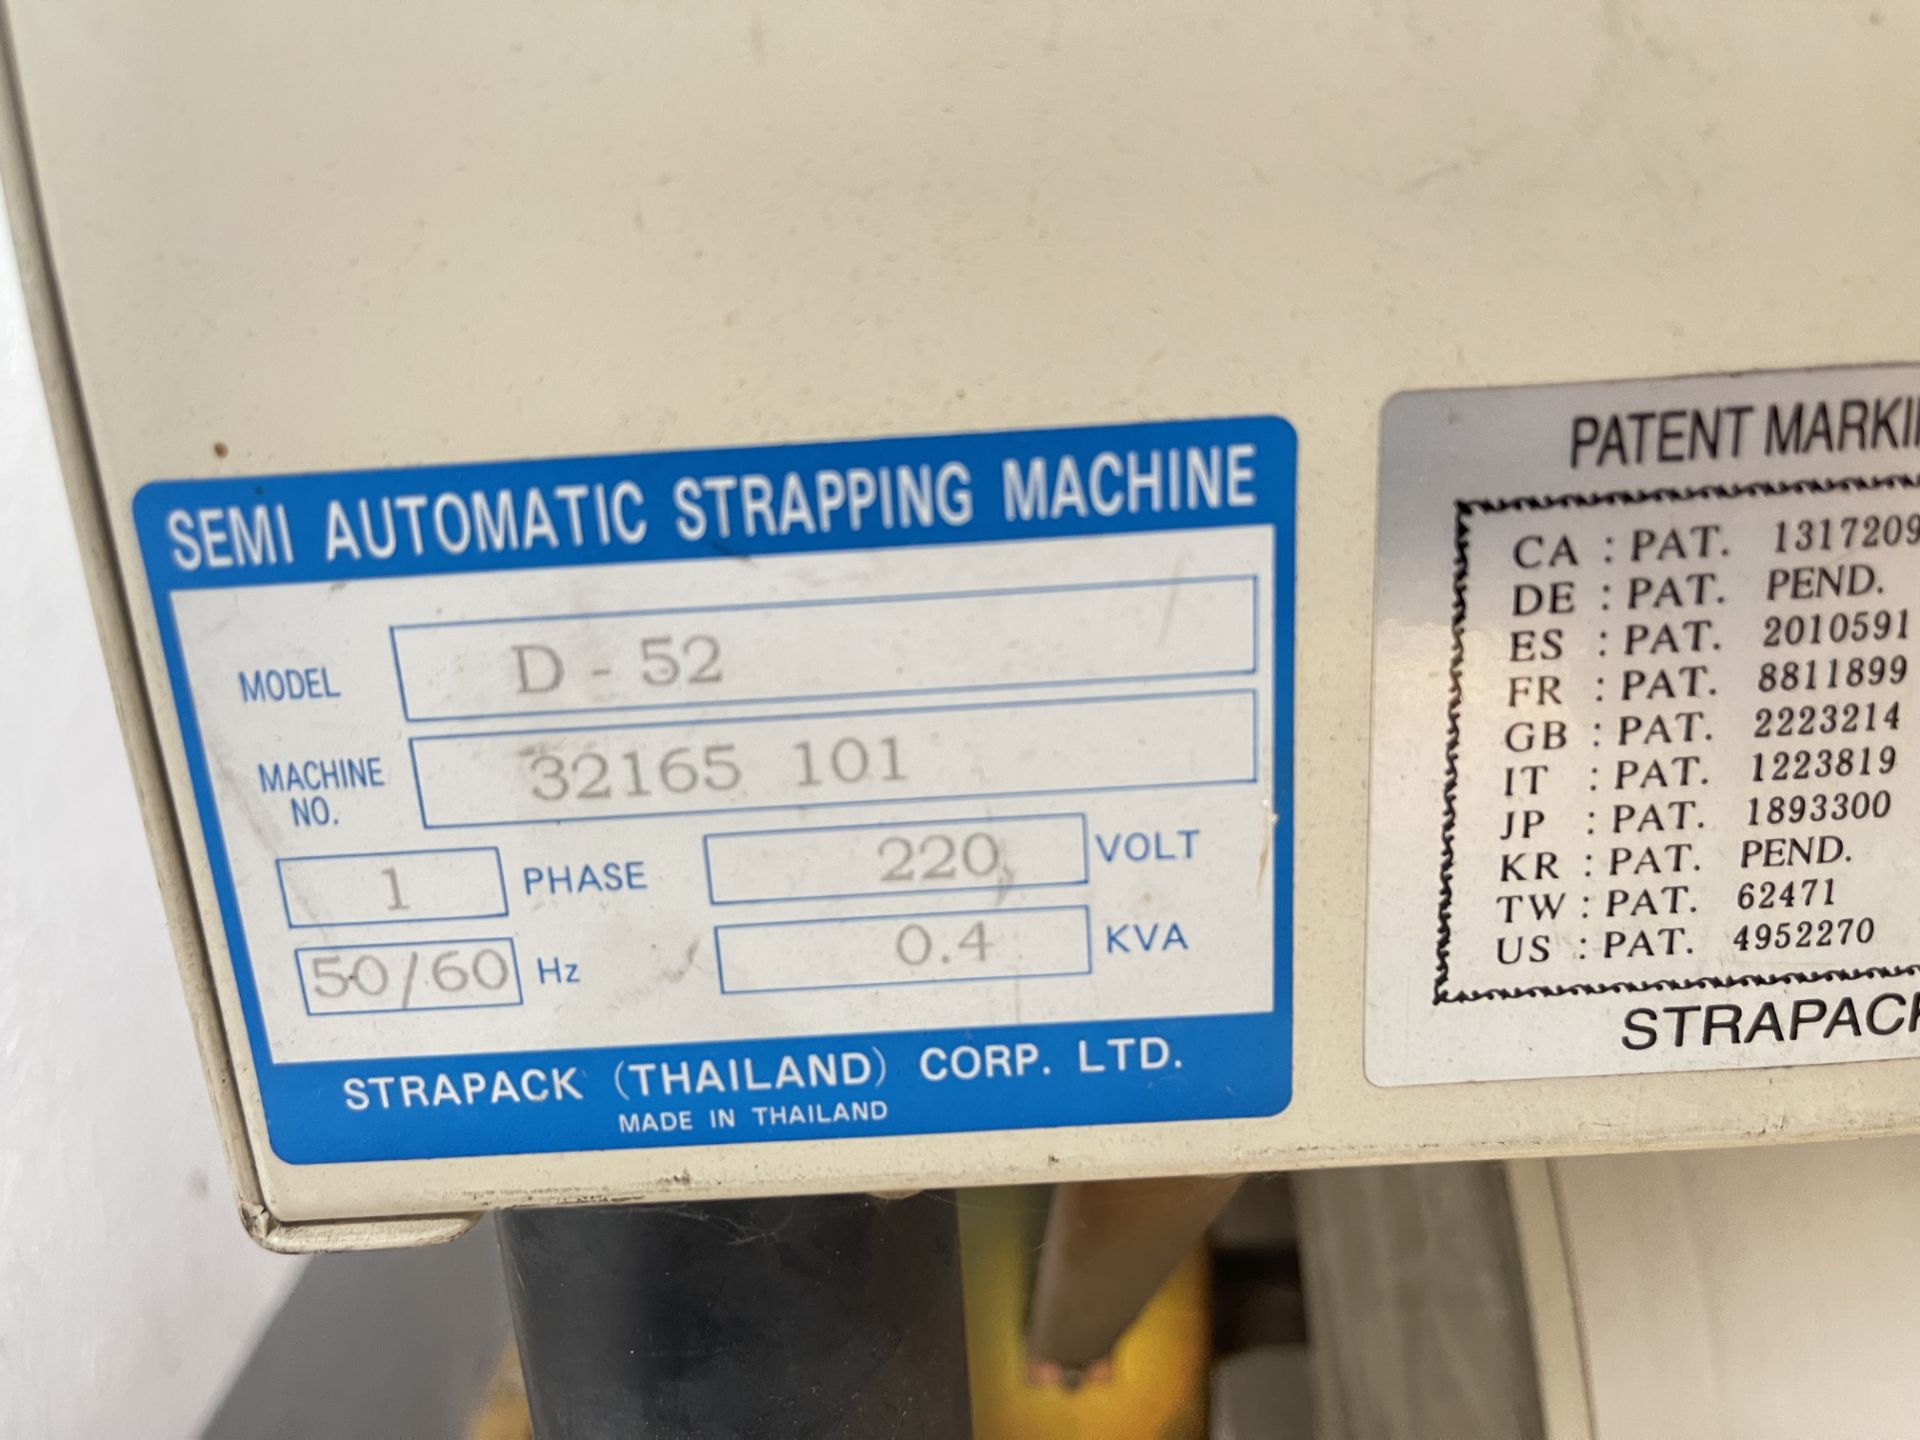 StraPack D-52 Semi Automatic Strapping machine. S/No 32165 101 - Image 5 of 5